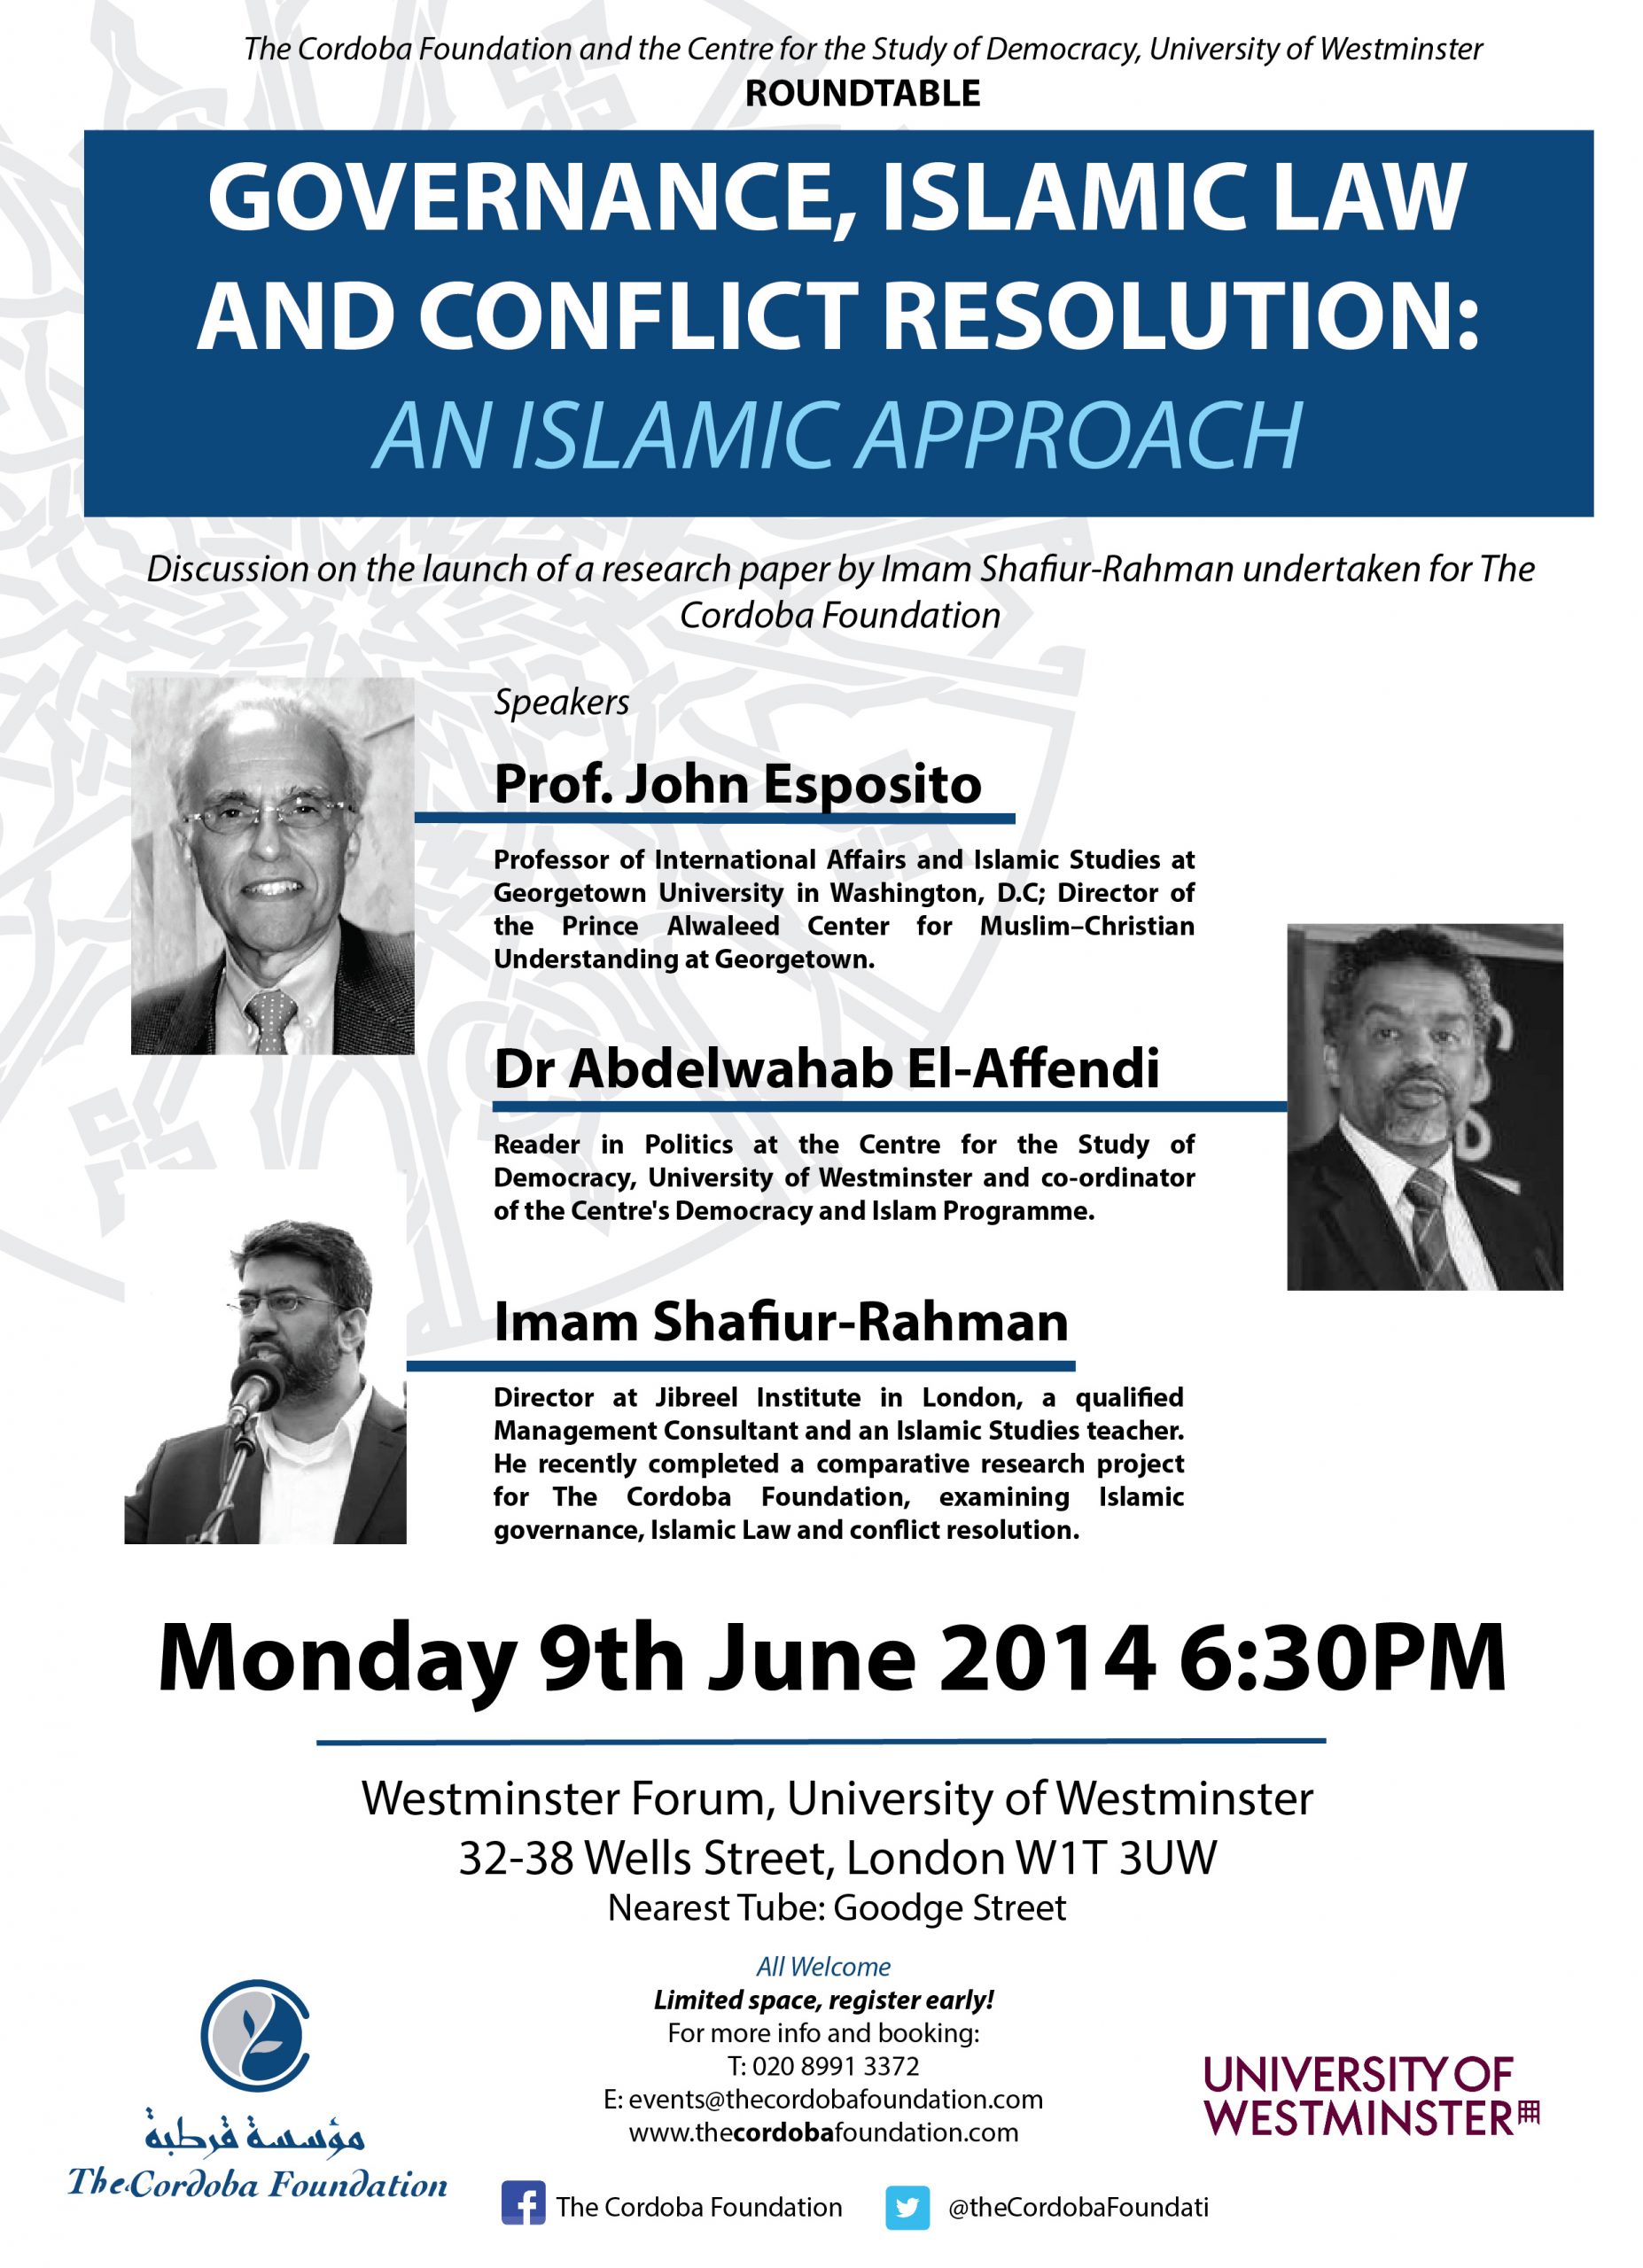 Roundtable: Governance, Islamic Law and Conflict Resolution: An Islamic Approach